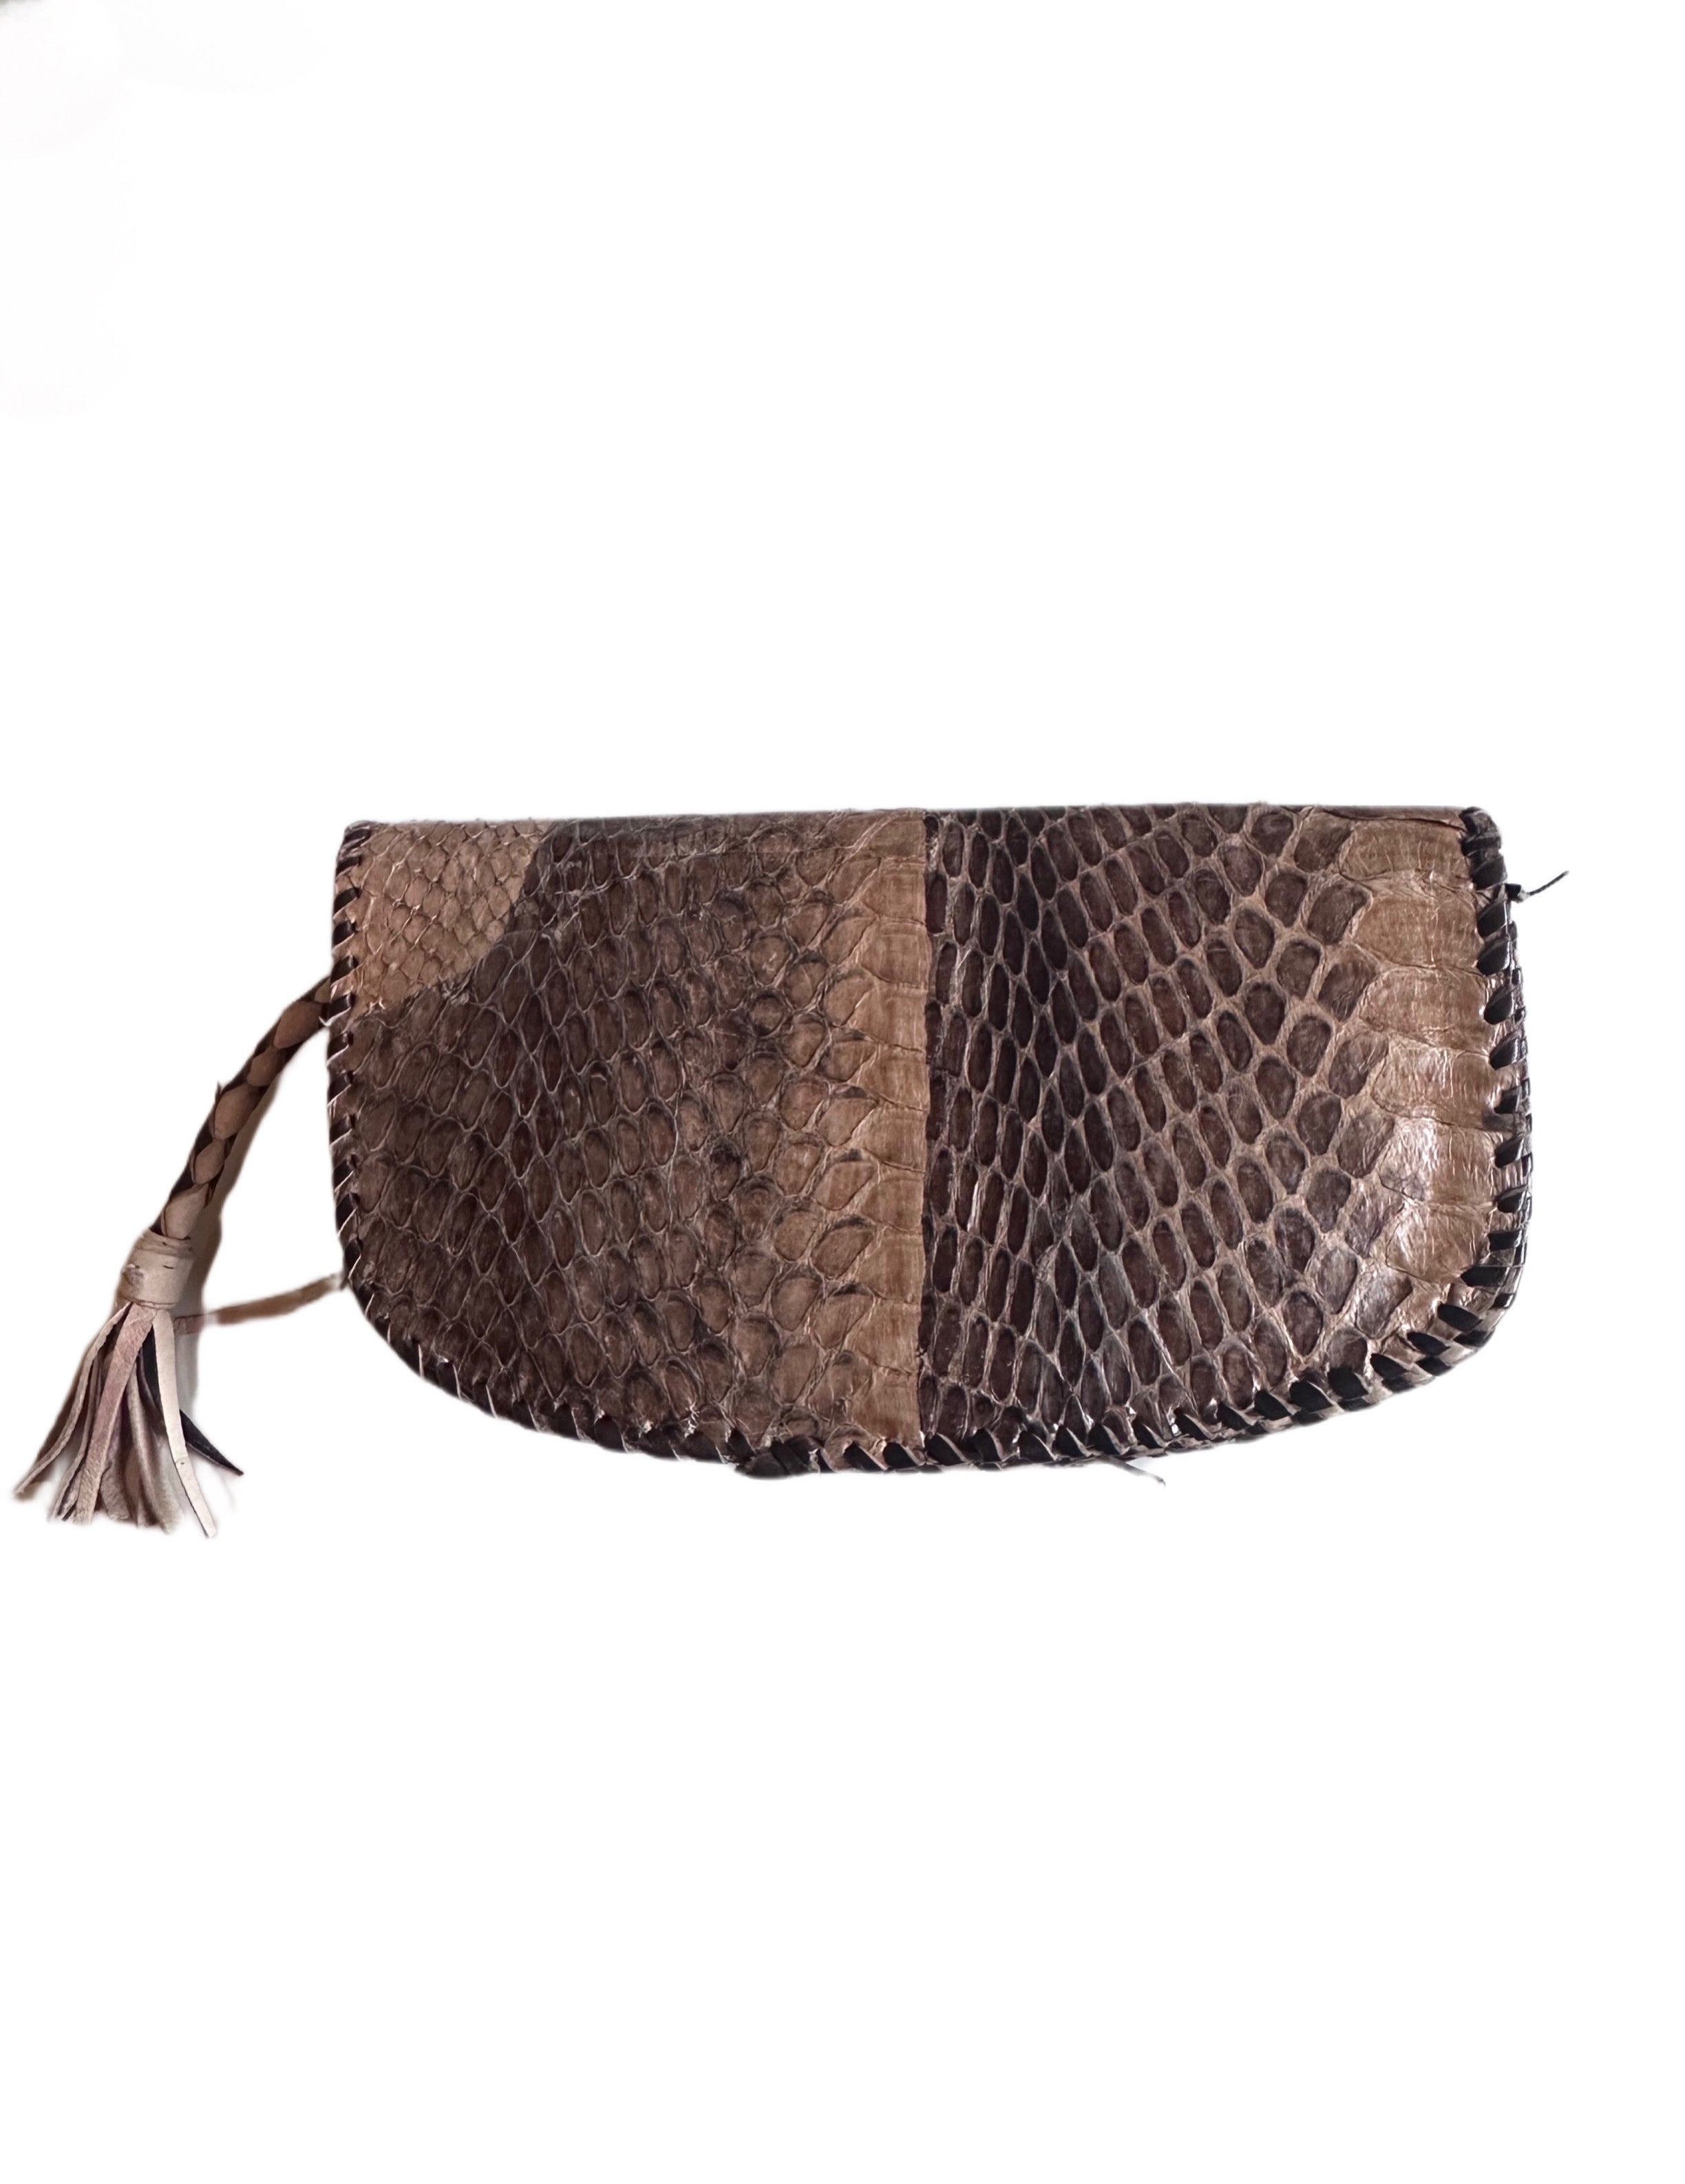 Handmade Large Coin Purse or Wallet Snakeskin